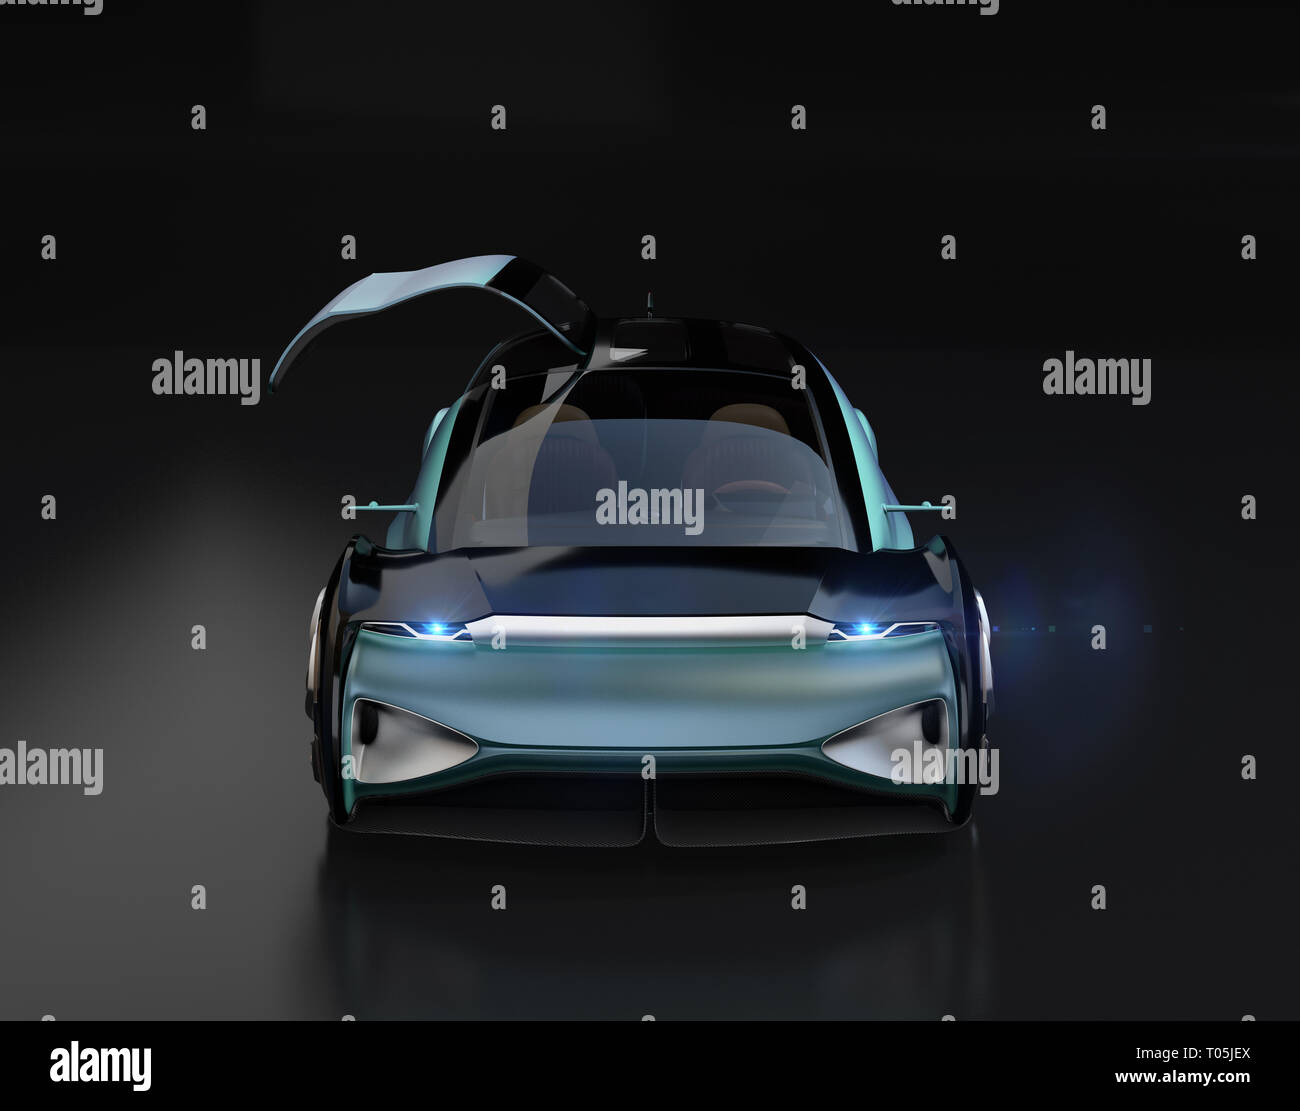 Front view of self driving electric car with right door opened on black background. 3D rendering image. Stock Photo